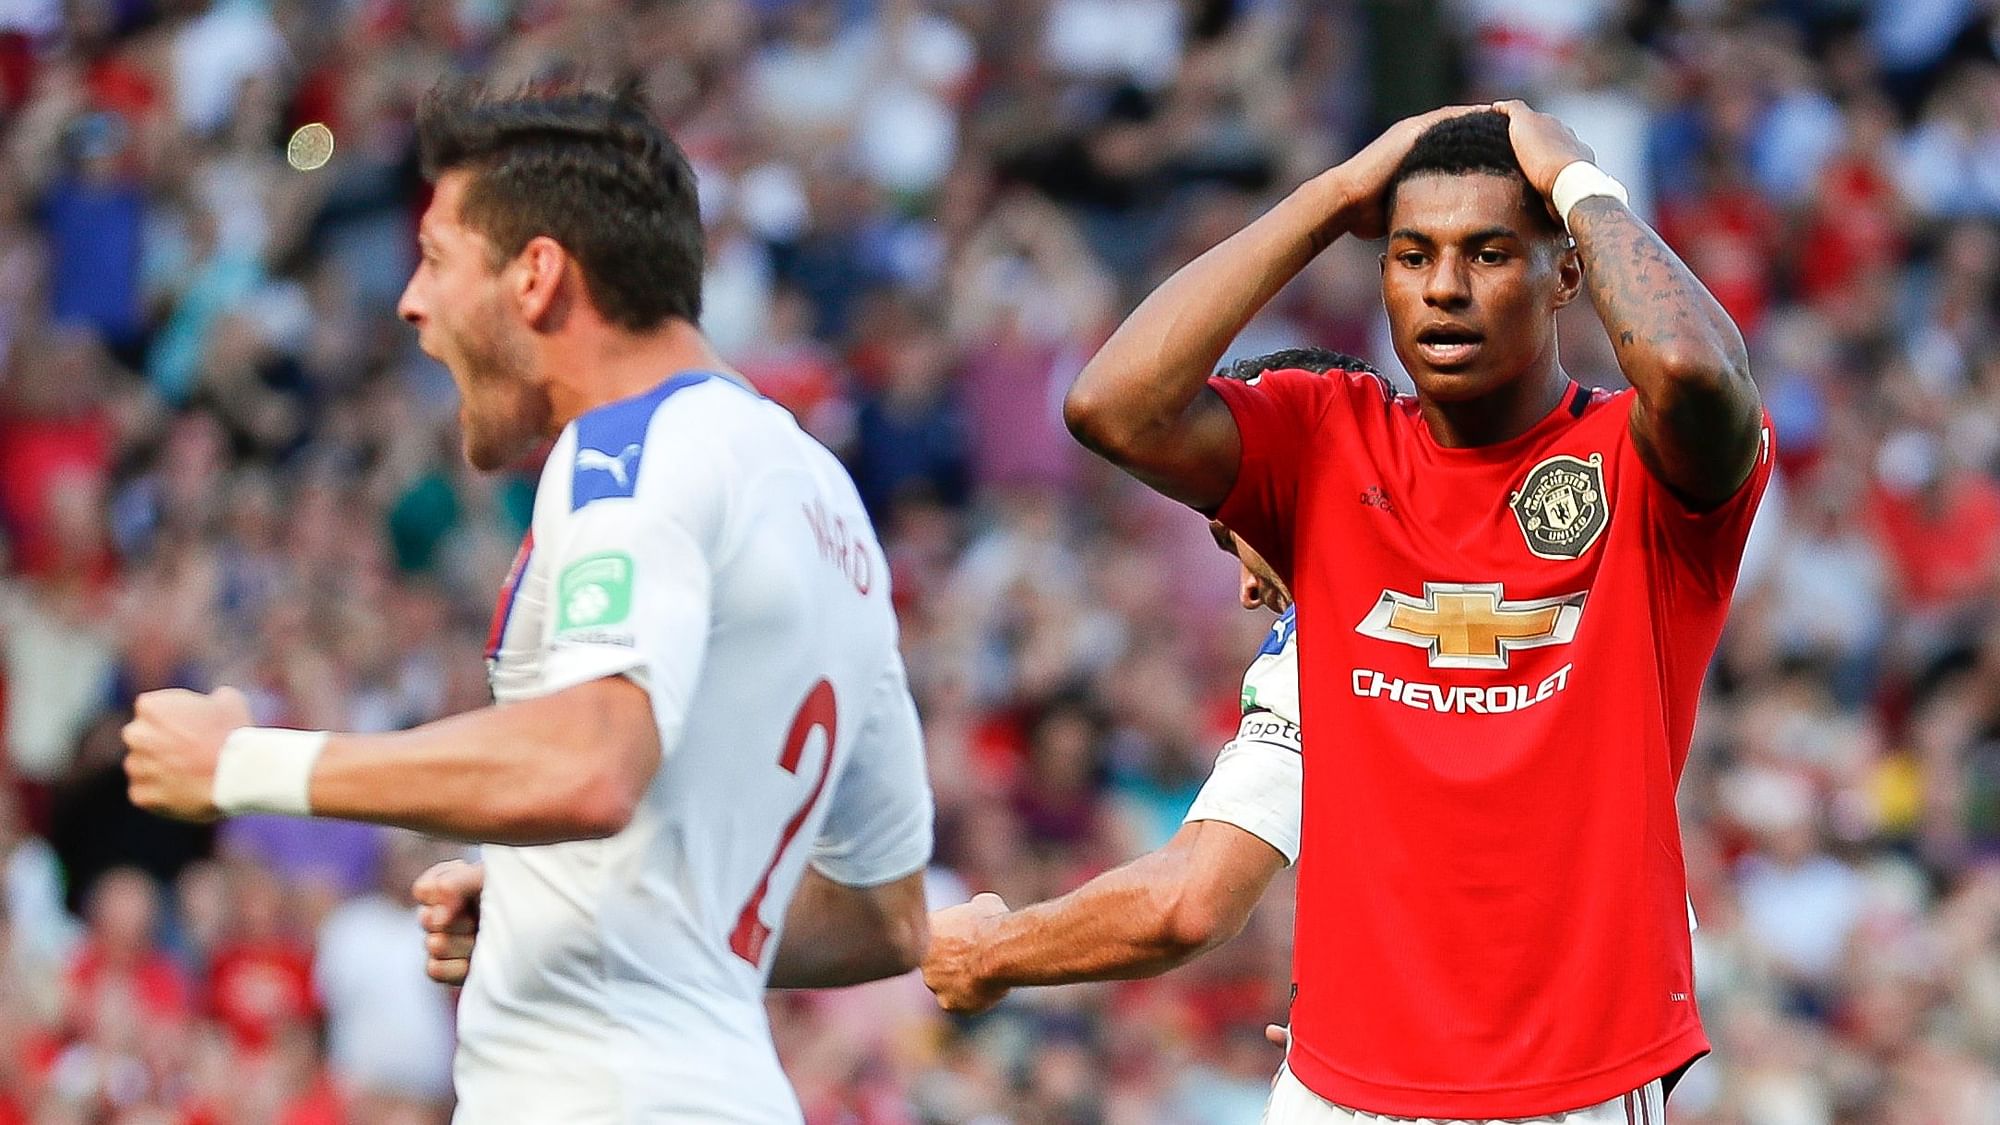 Manchester United’s Marcus Rashford reacts after missing to score on a penalty kick during the English Premier League soccer match.